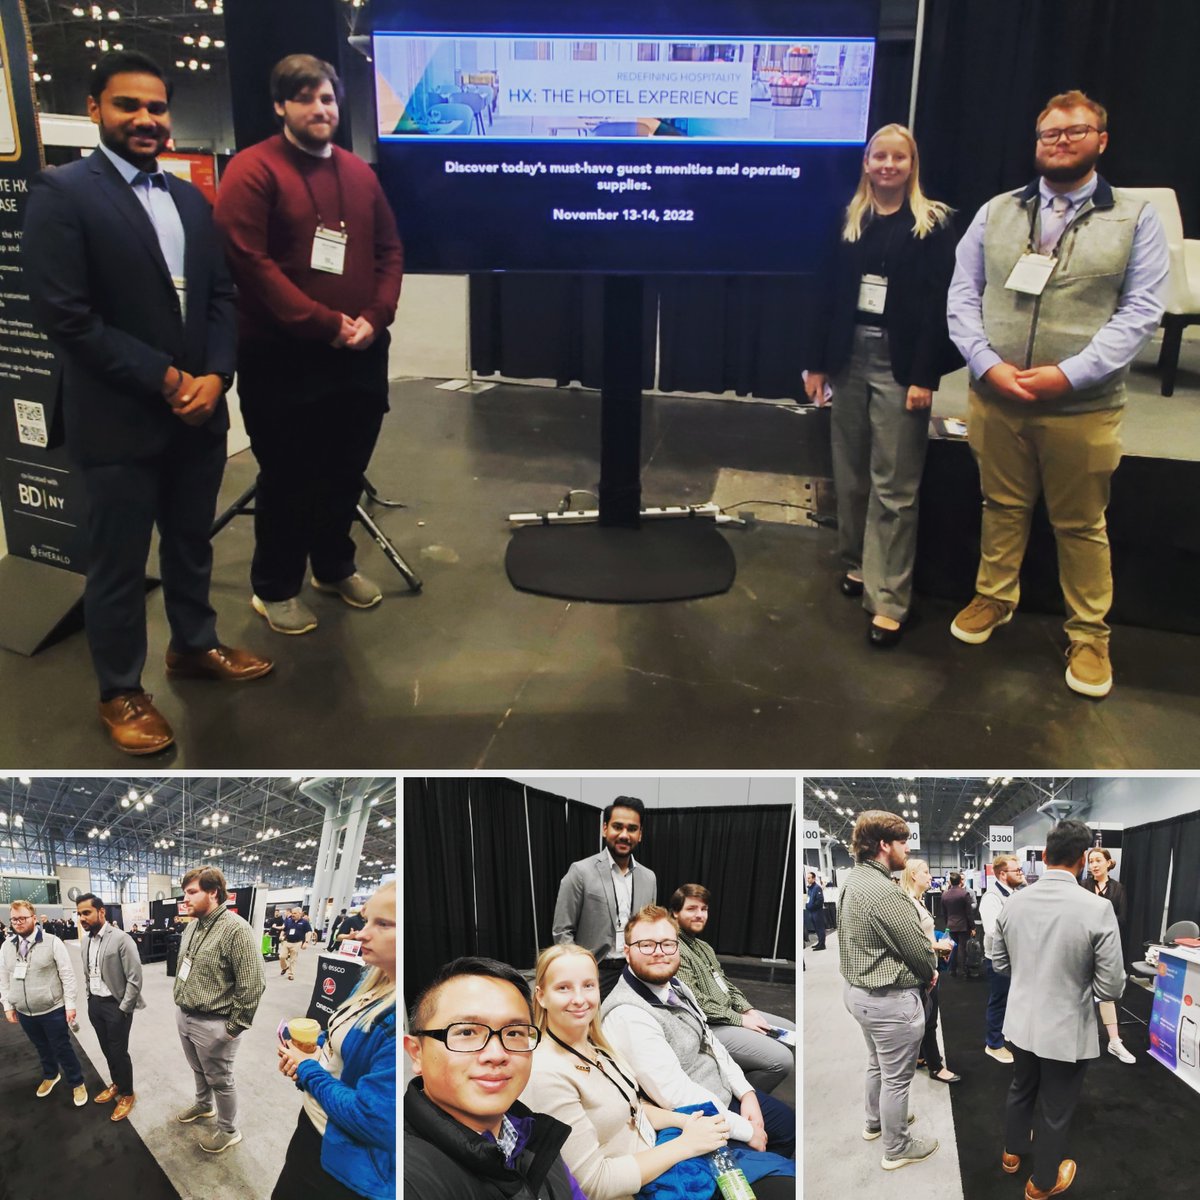 We had a wonderful trip to #NYC for a hotel trade show and conference. HX: The Hotel Experience #HX2022 is one of the biggest hotel trade shows in the world. It is also the can’t-miss conference on hotel trends, technology, and operations. @HXHotel @wcu